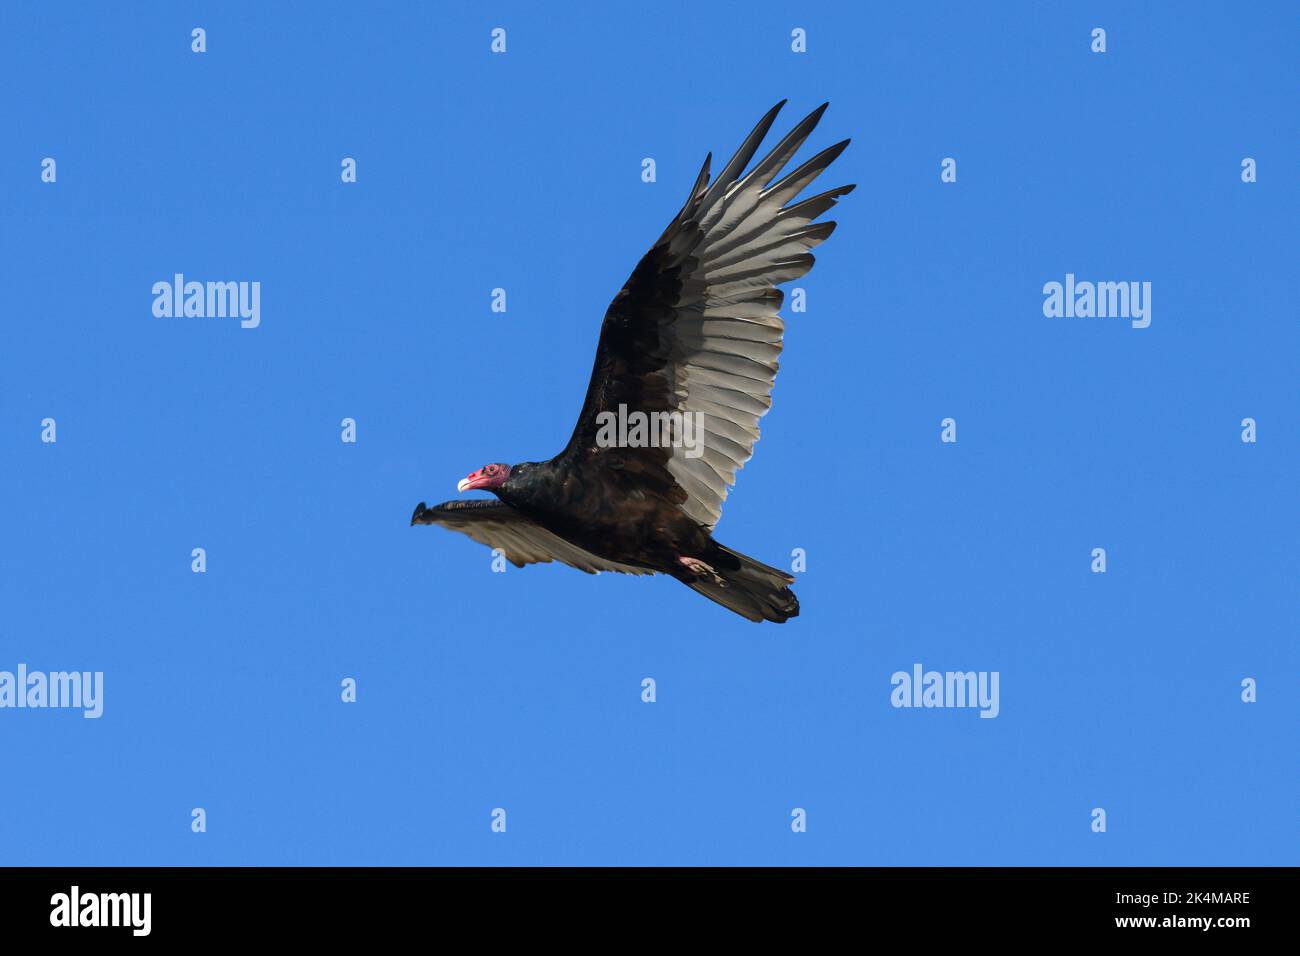 Turkey vulture with red head and black feathers soaring in isolated pose against clear blue sky Stock Photo